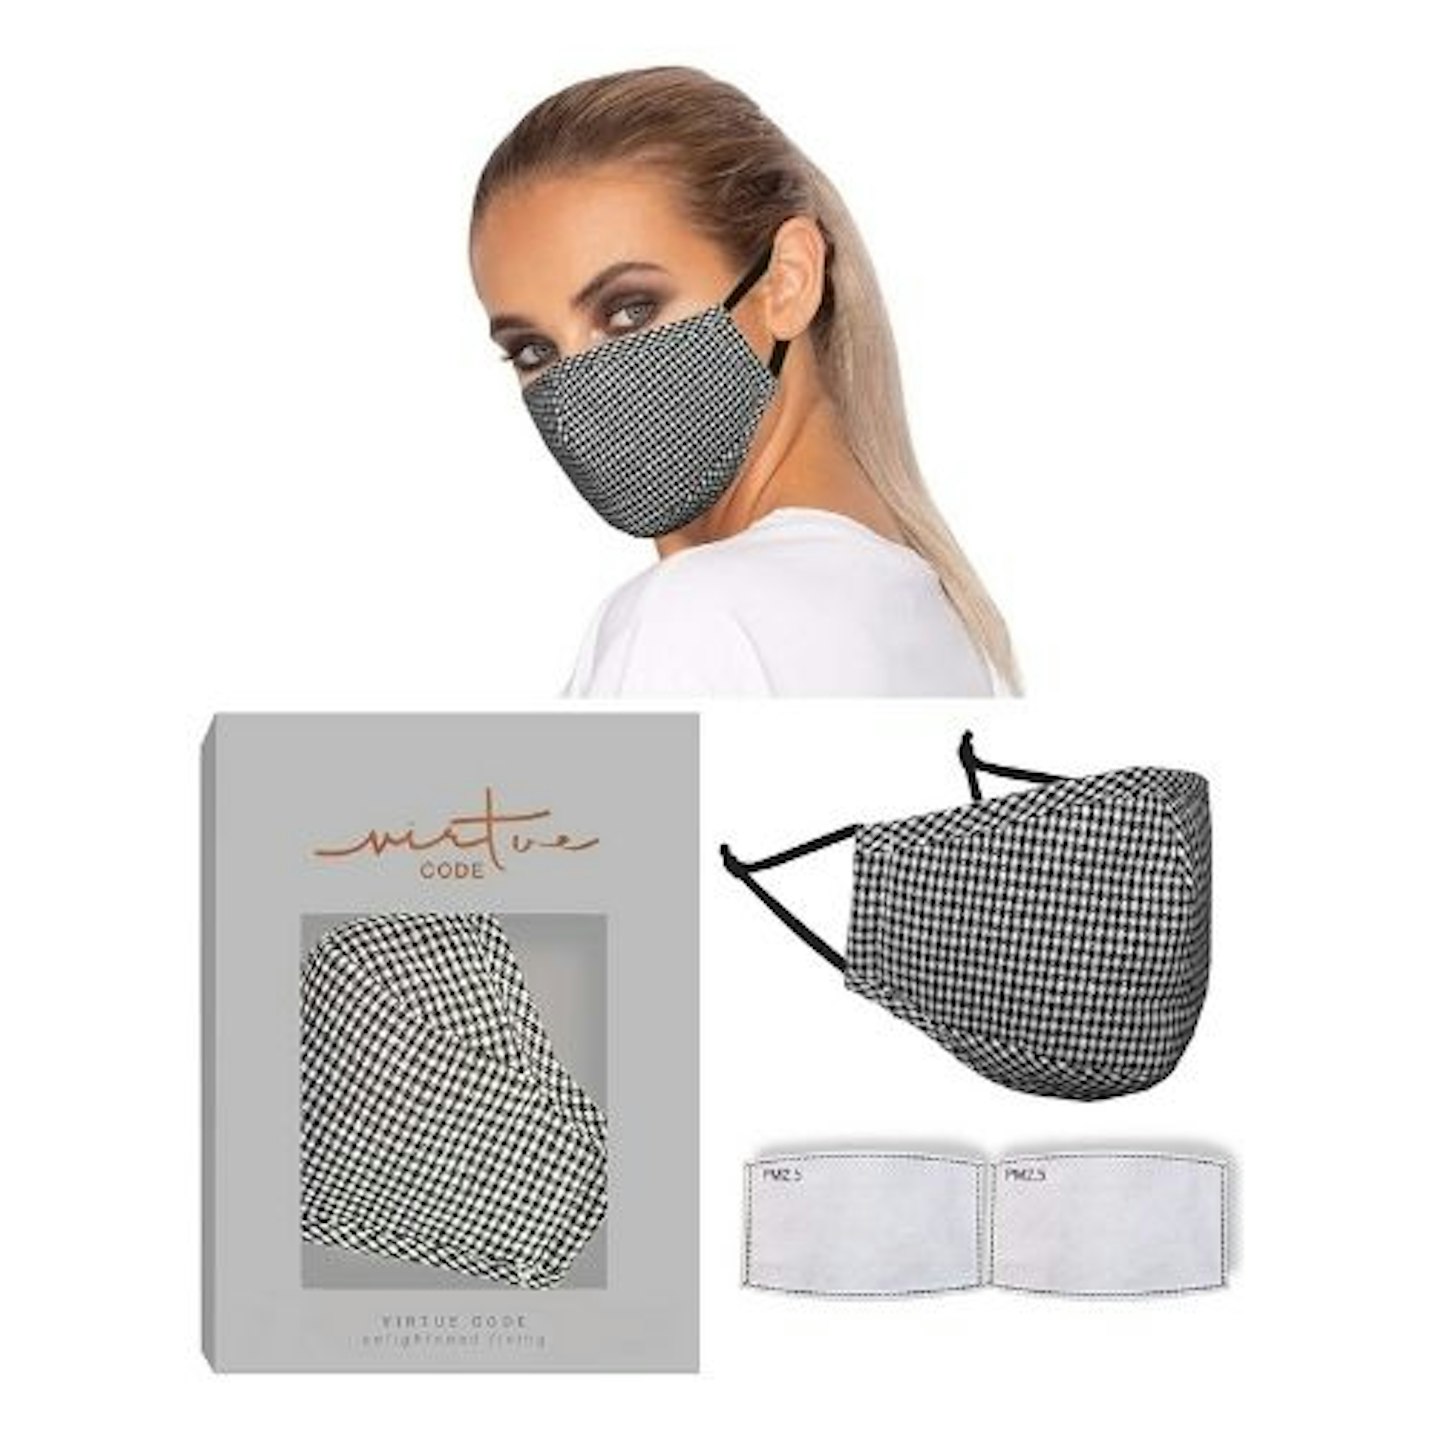 The Solution Mask in Black White Checks by VIRTUE CODE